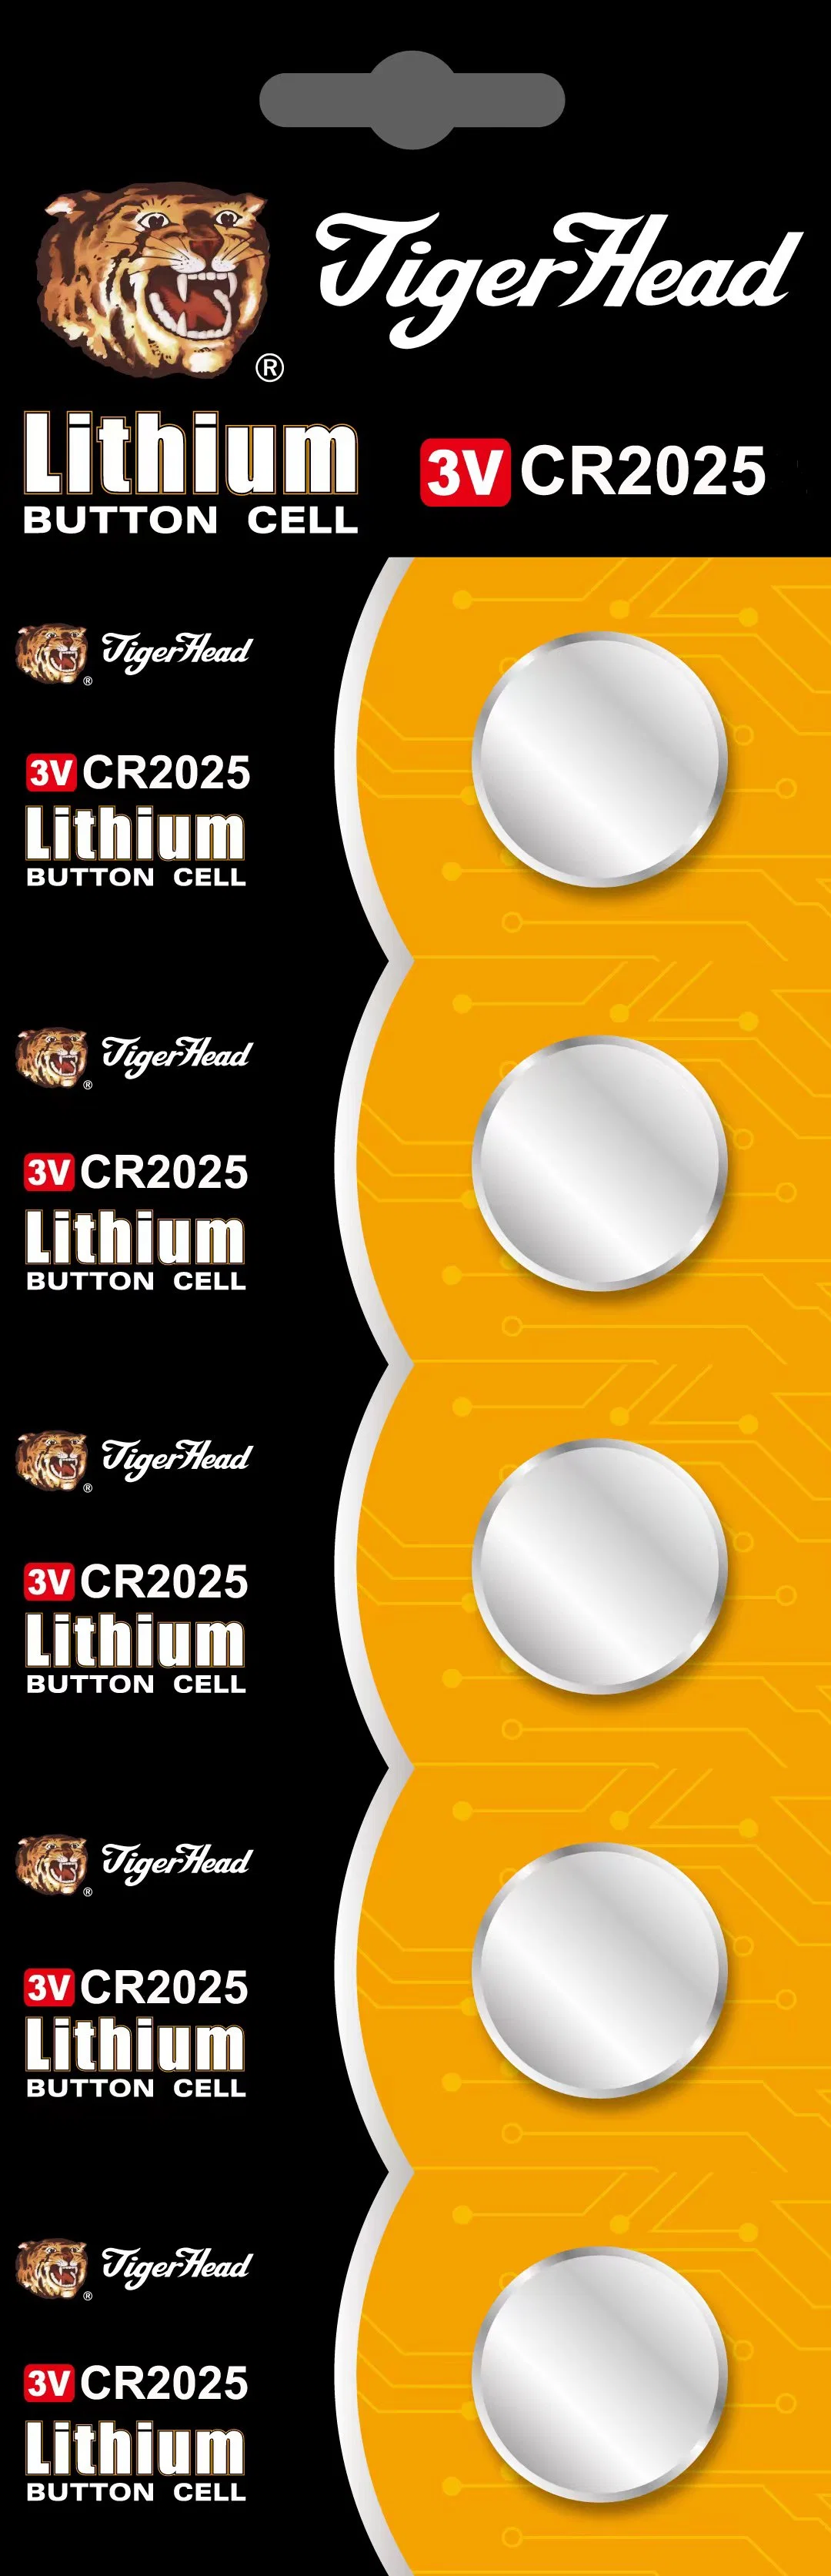 3V Cr2032/Cr2016 Lithium Button Cell Tiger Head Primary Dry Battery for Toy/Beauty Instrument